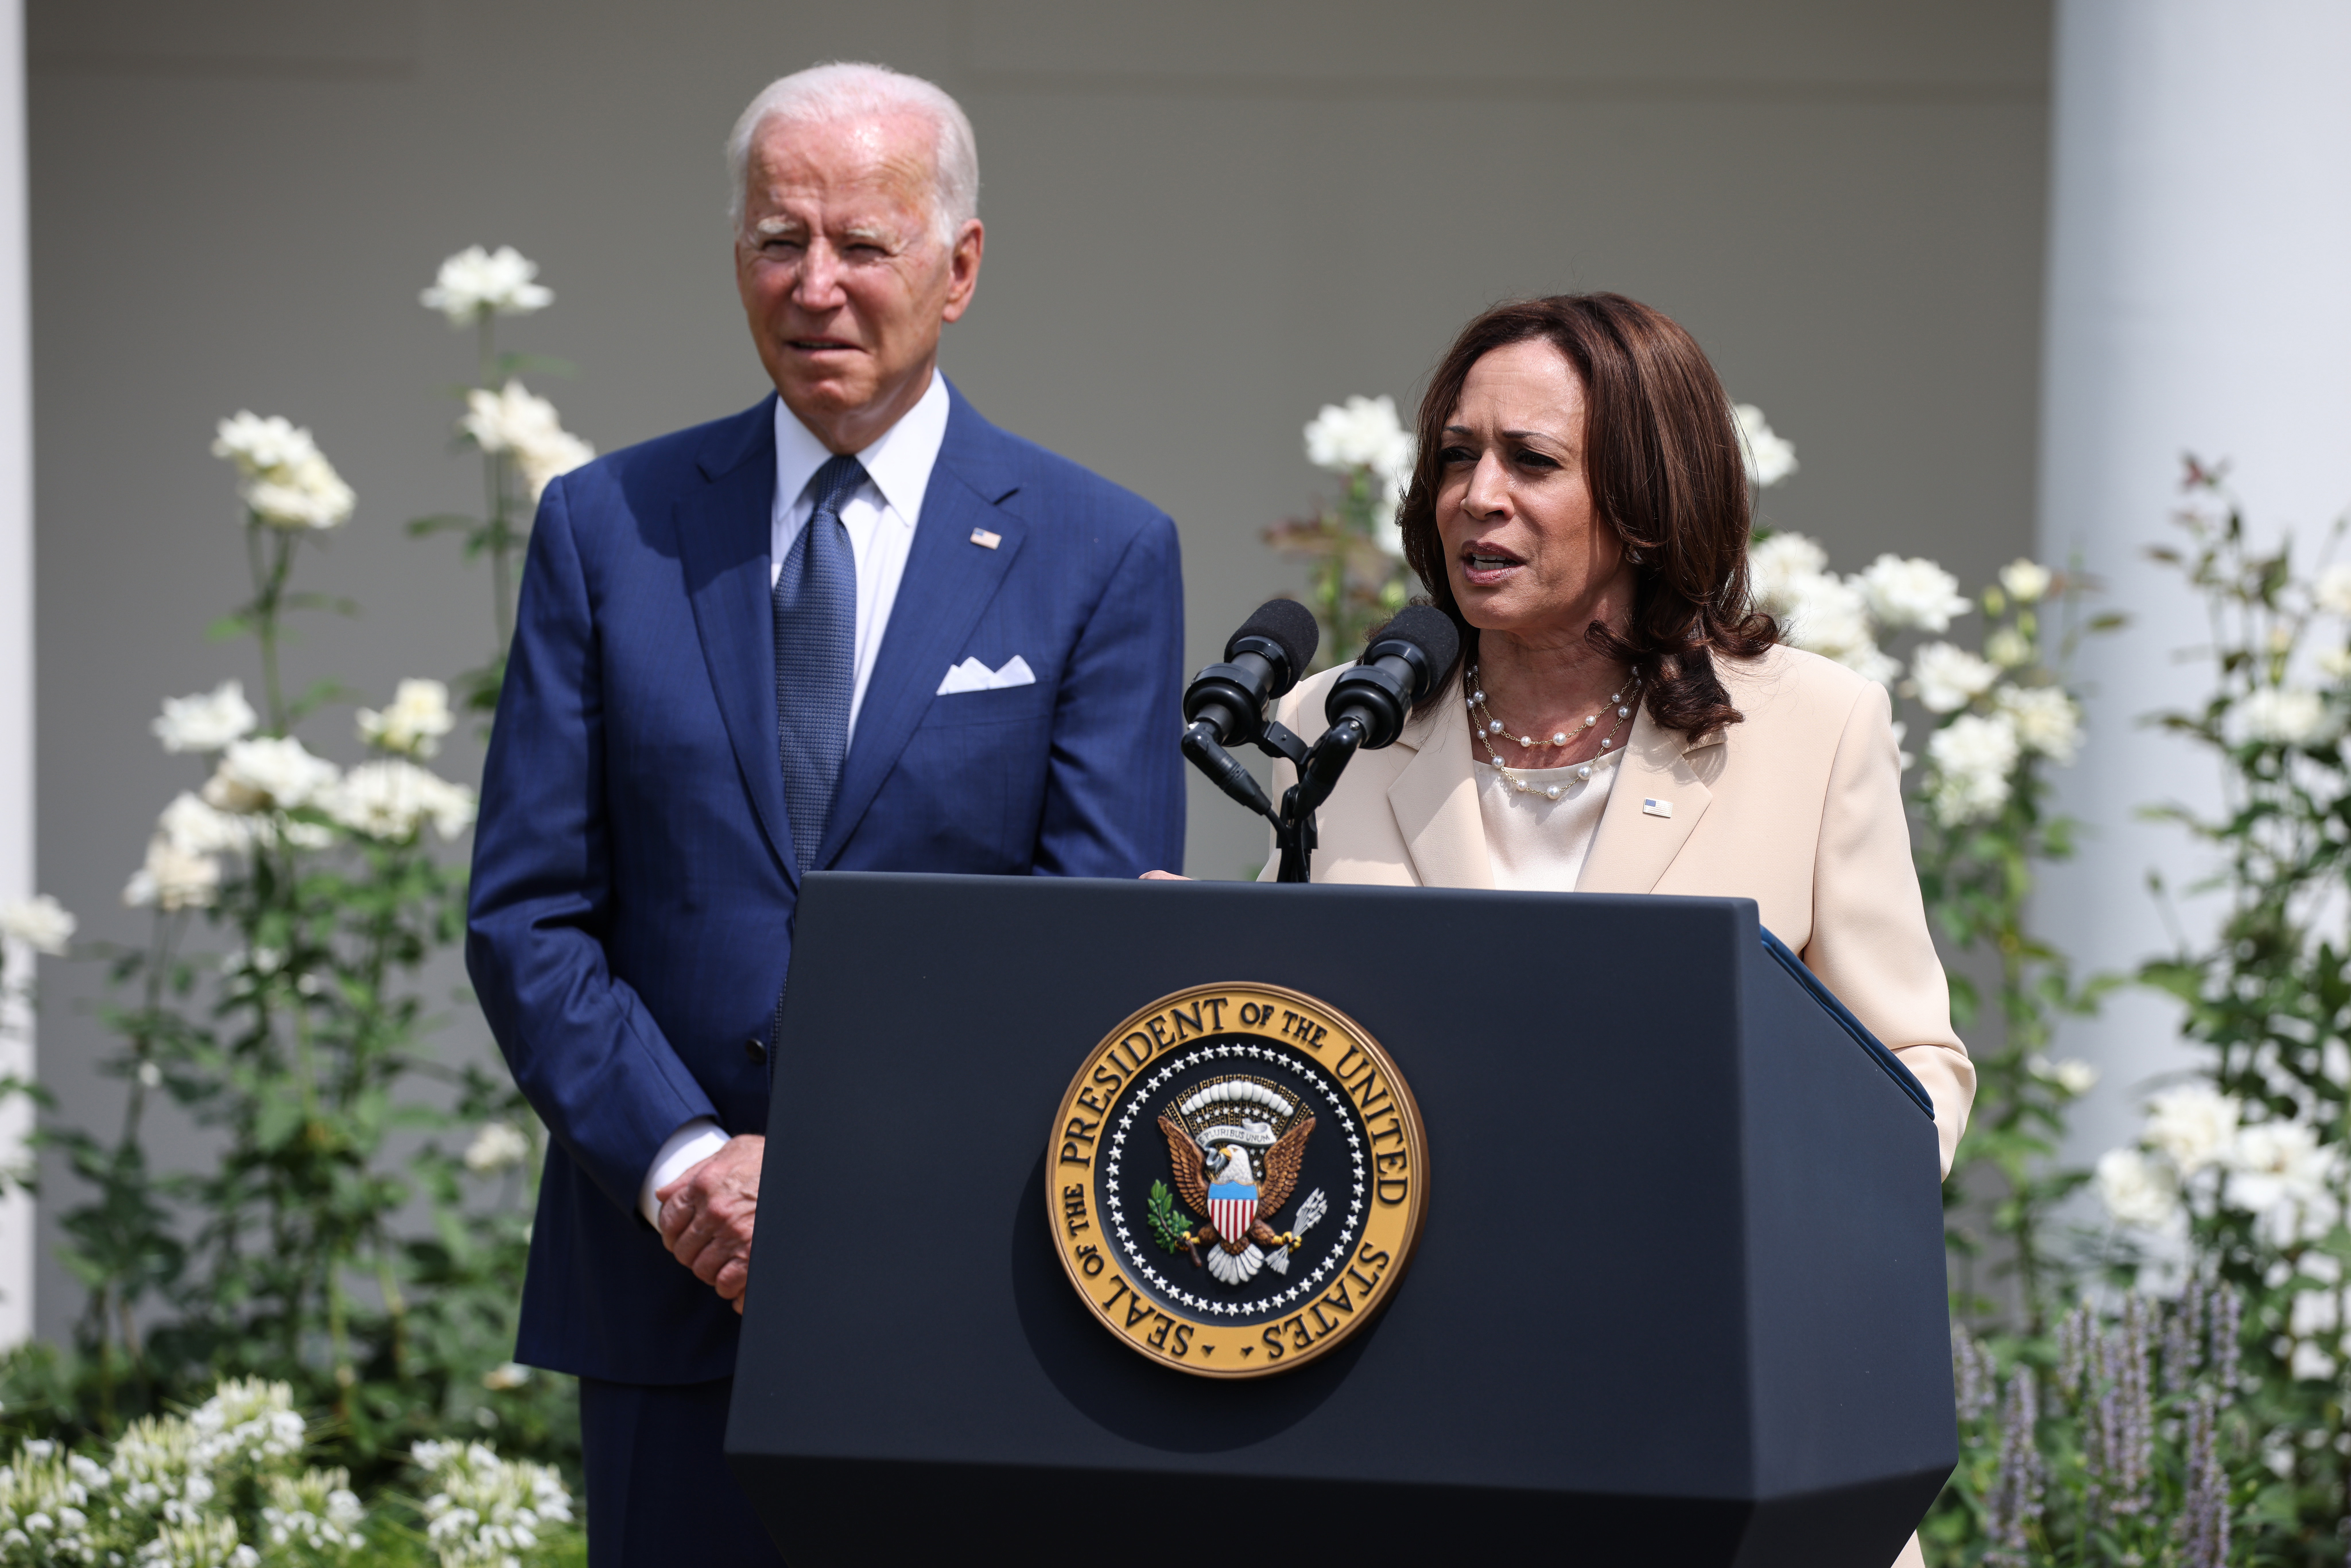 WASHINGTON, DC - JULY 26: U.S. Vice President Kamala Harris delivers remarks, as U.S. President Joe Biden looks on, in the Rose Garden of the White House on July 26, 2021 in Washington, DC. The event was to mark the 31st anniversary of the Americans with Disabilities Act (ADA) being signed into law. (Photo by Anna Moneymaker/Getty Images)